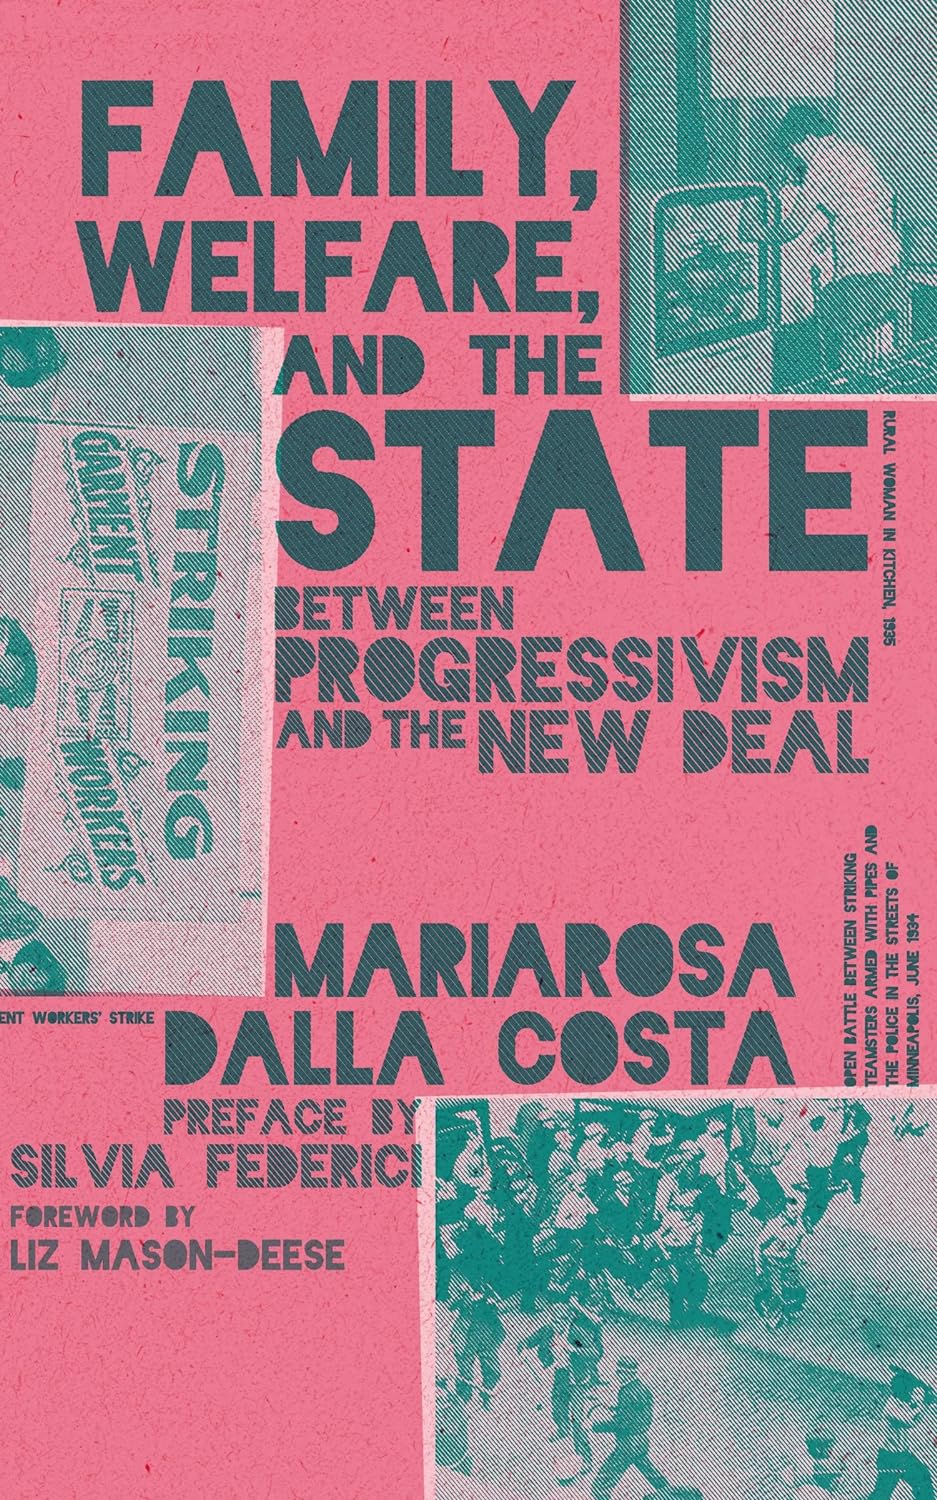 Family, Welfare, and the State: Between Progressivism and the New Deal